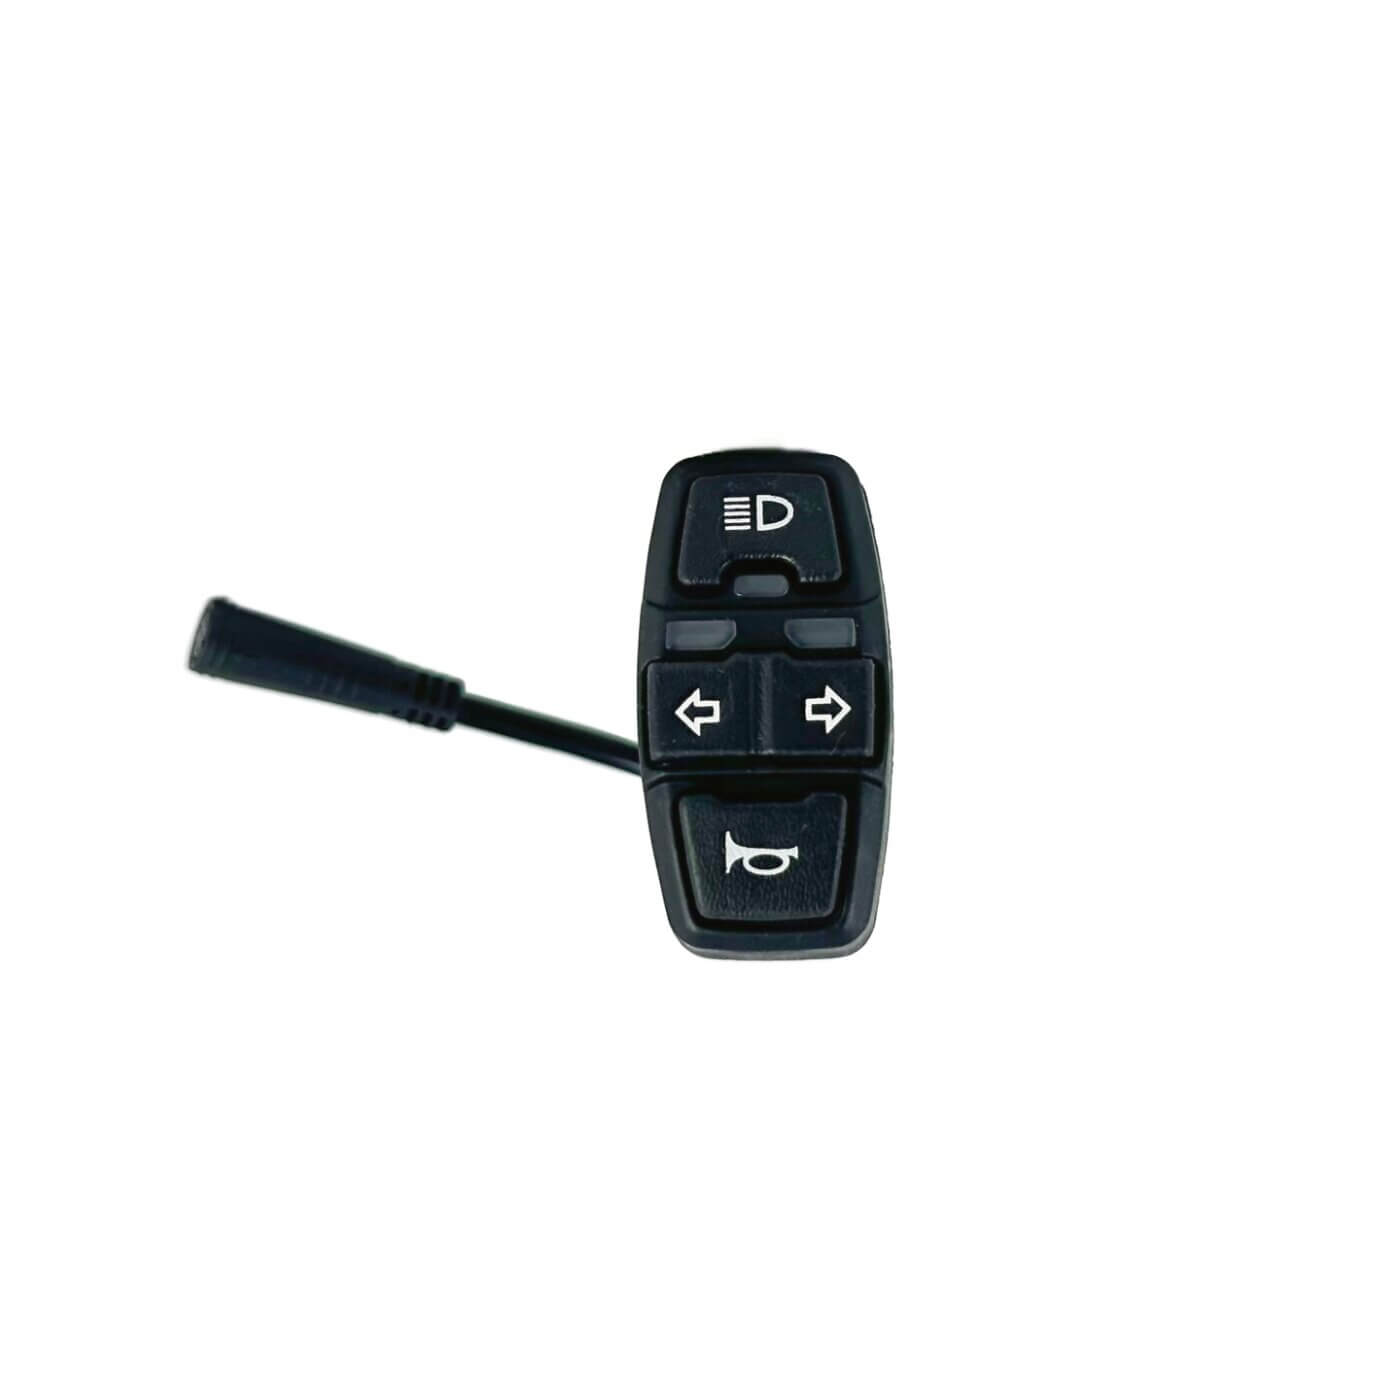 A black remote control featuring a Lights and Horn Button Module on a white background.